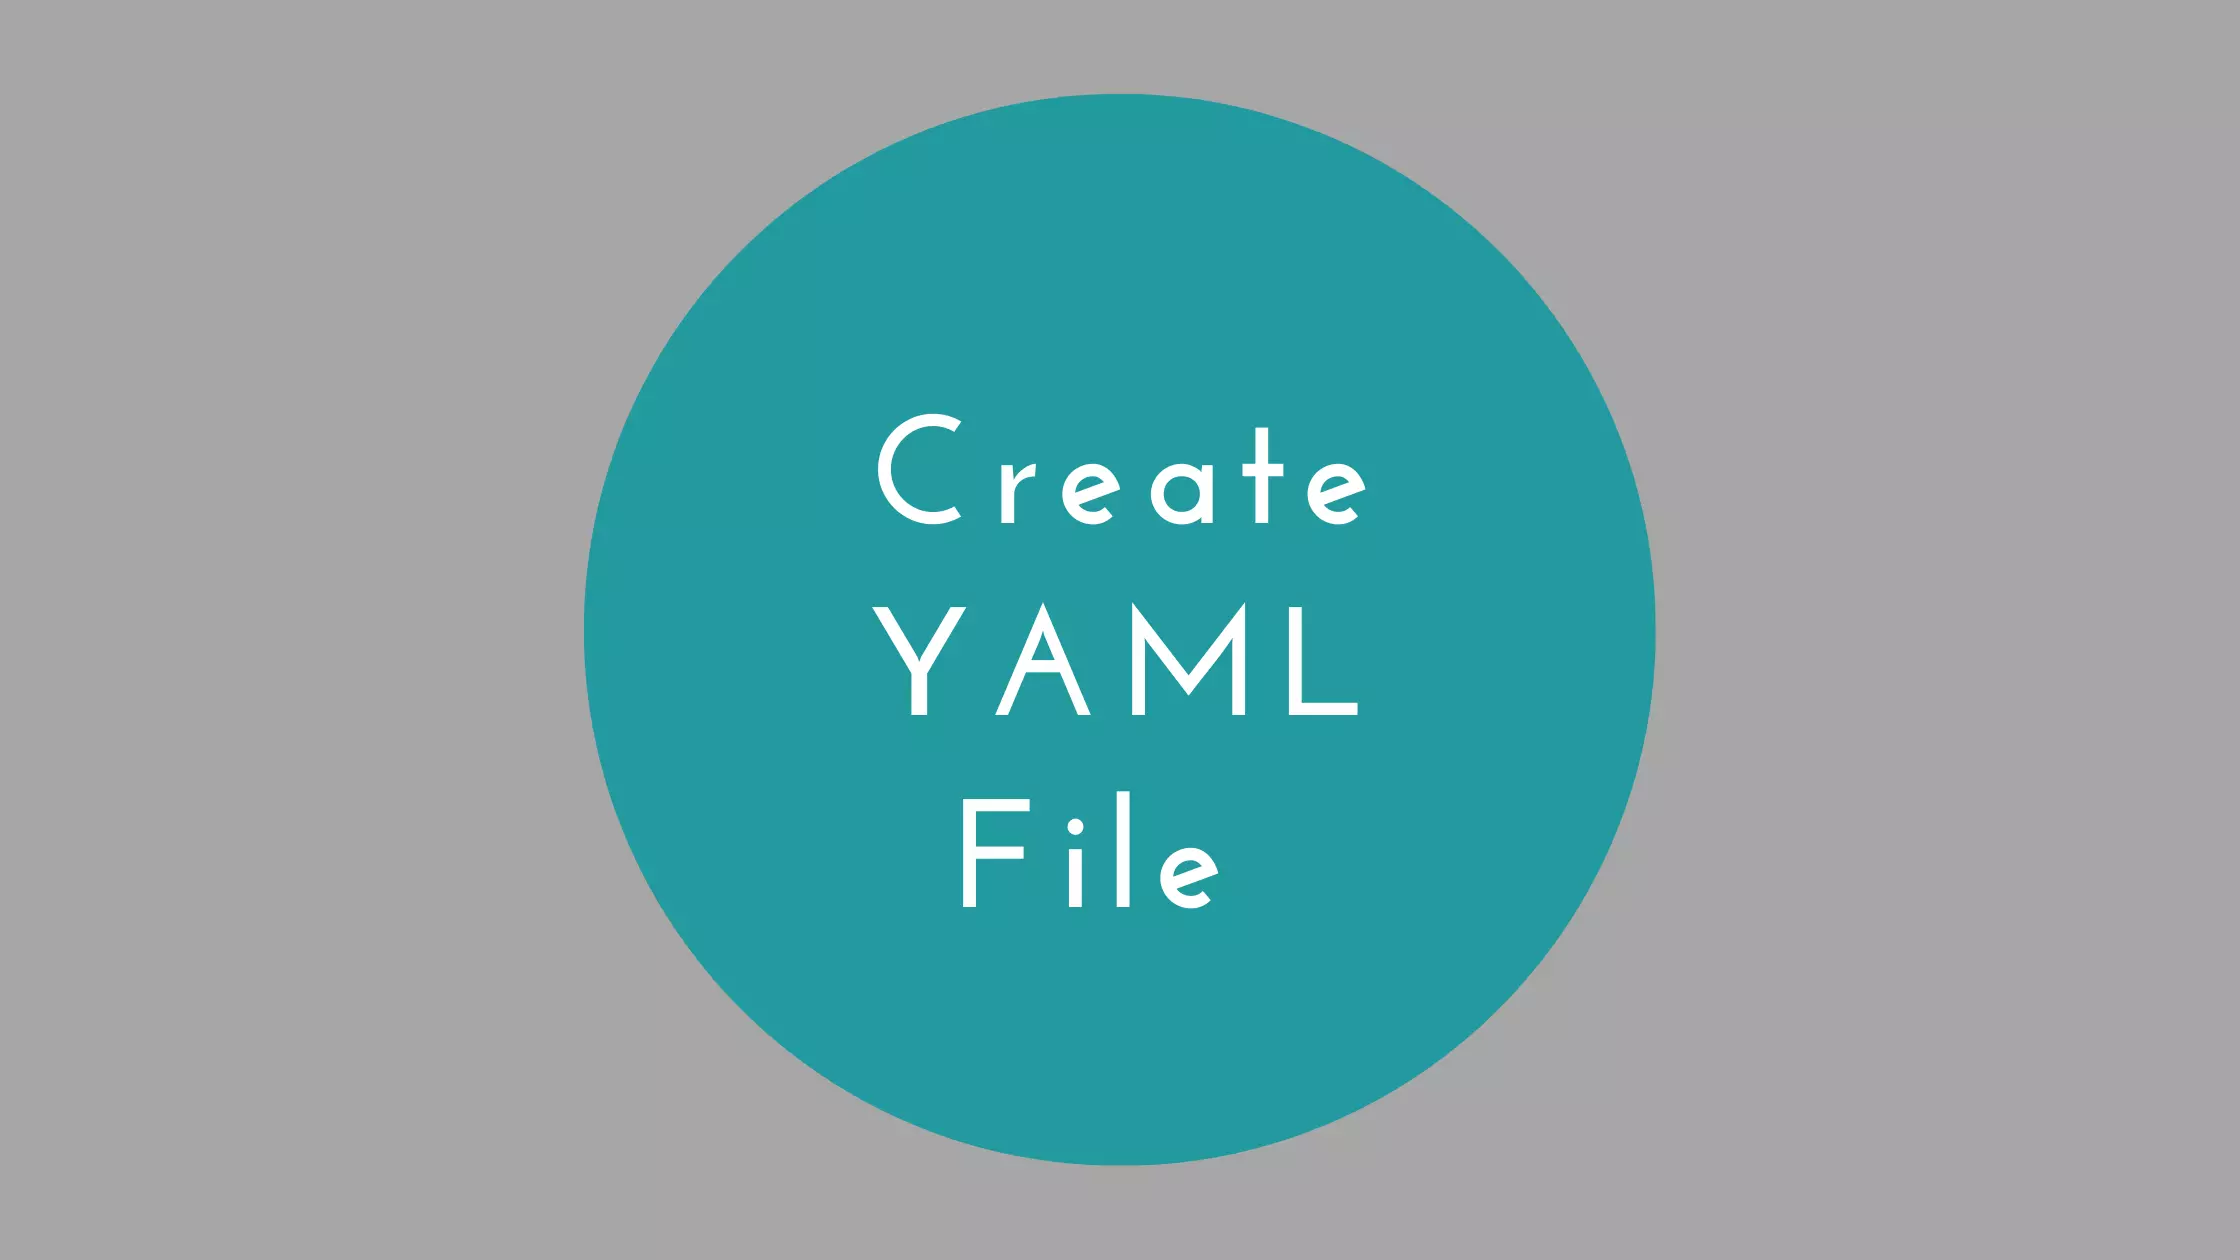 How to create YAML file. This article helps to create valid YAML document File.